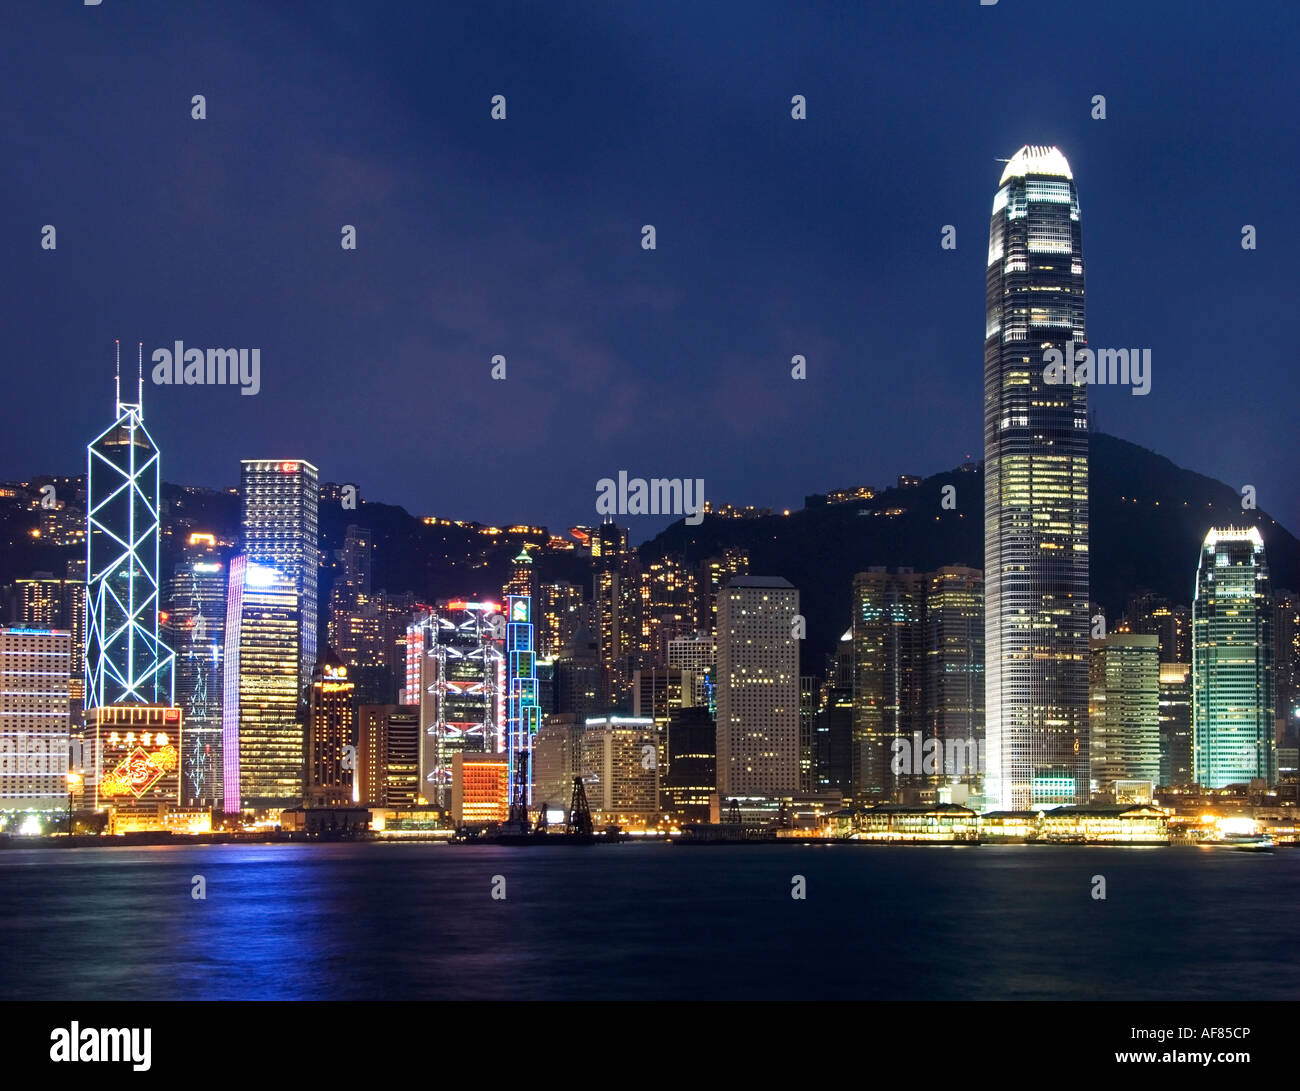 Night View of the famous Hong Kong Skyline seen from the Kowloon Side of the Harbour, Hong Kong, China, Asia Stock Photo